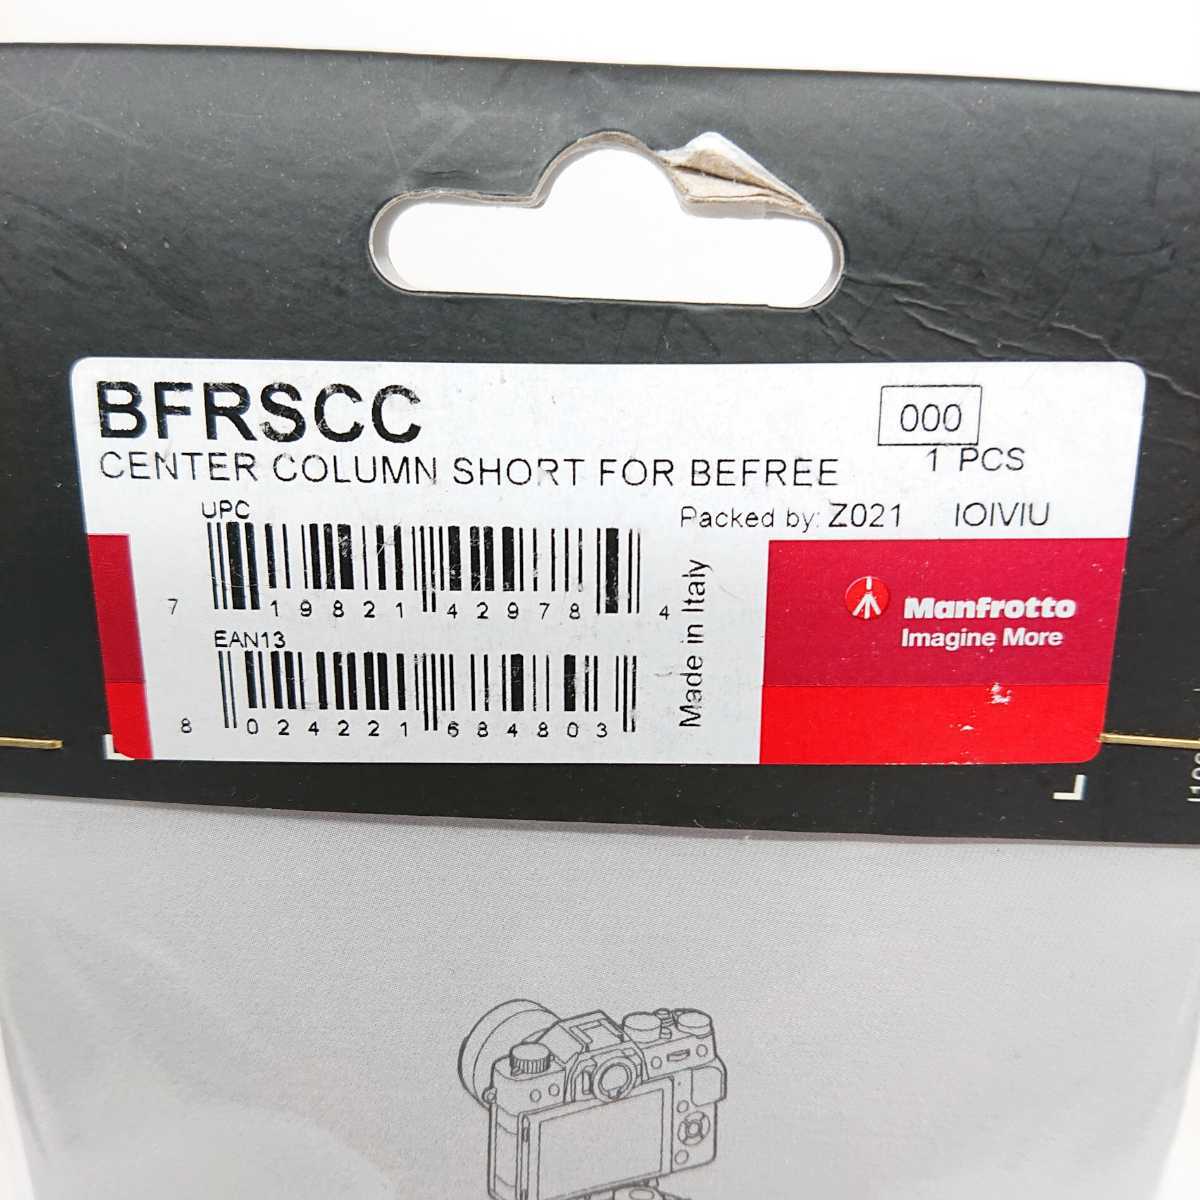 Manfrotto BFRSCC CENTER COLUMN SHORT FOR BEFREE Made in Italy befree用 マンフロット ショートセンターポール ☆ 未使用品 送料無料 ☆